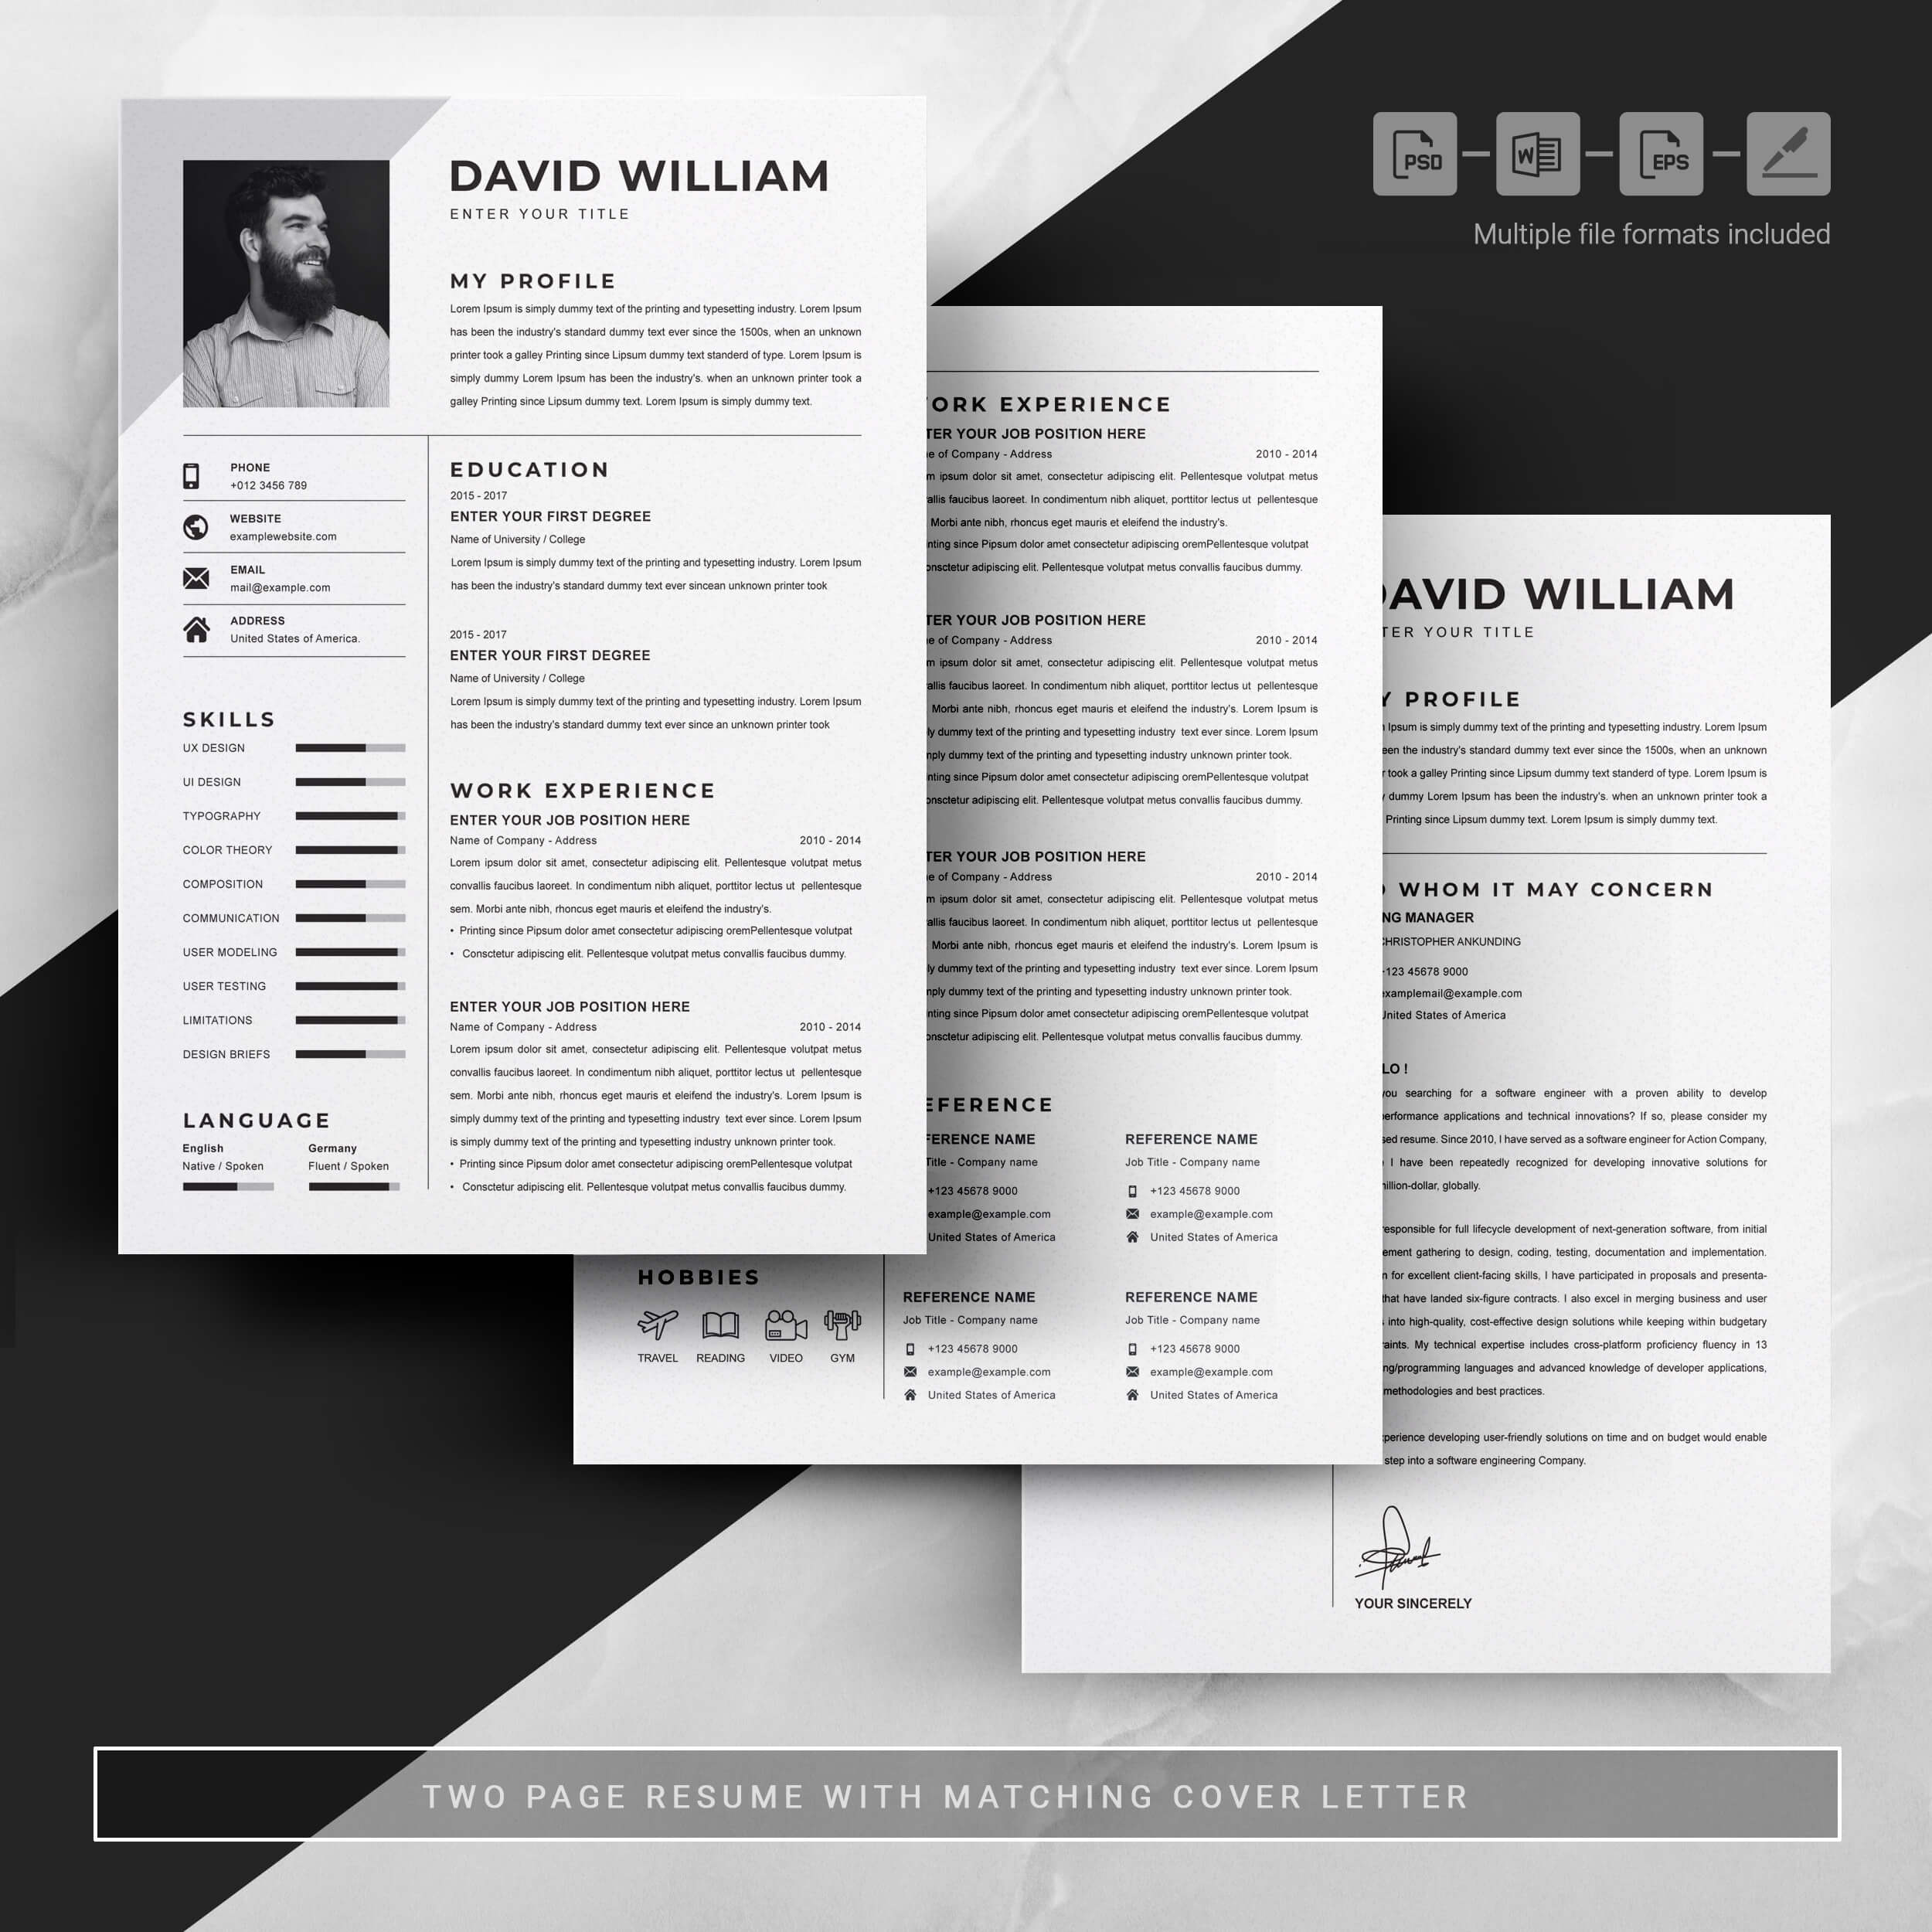 04 3 pages free resume design template 492